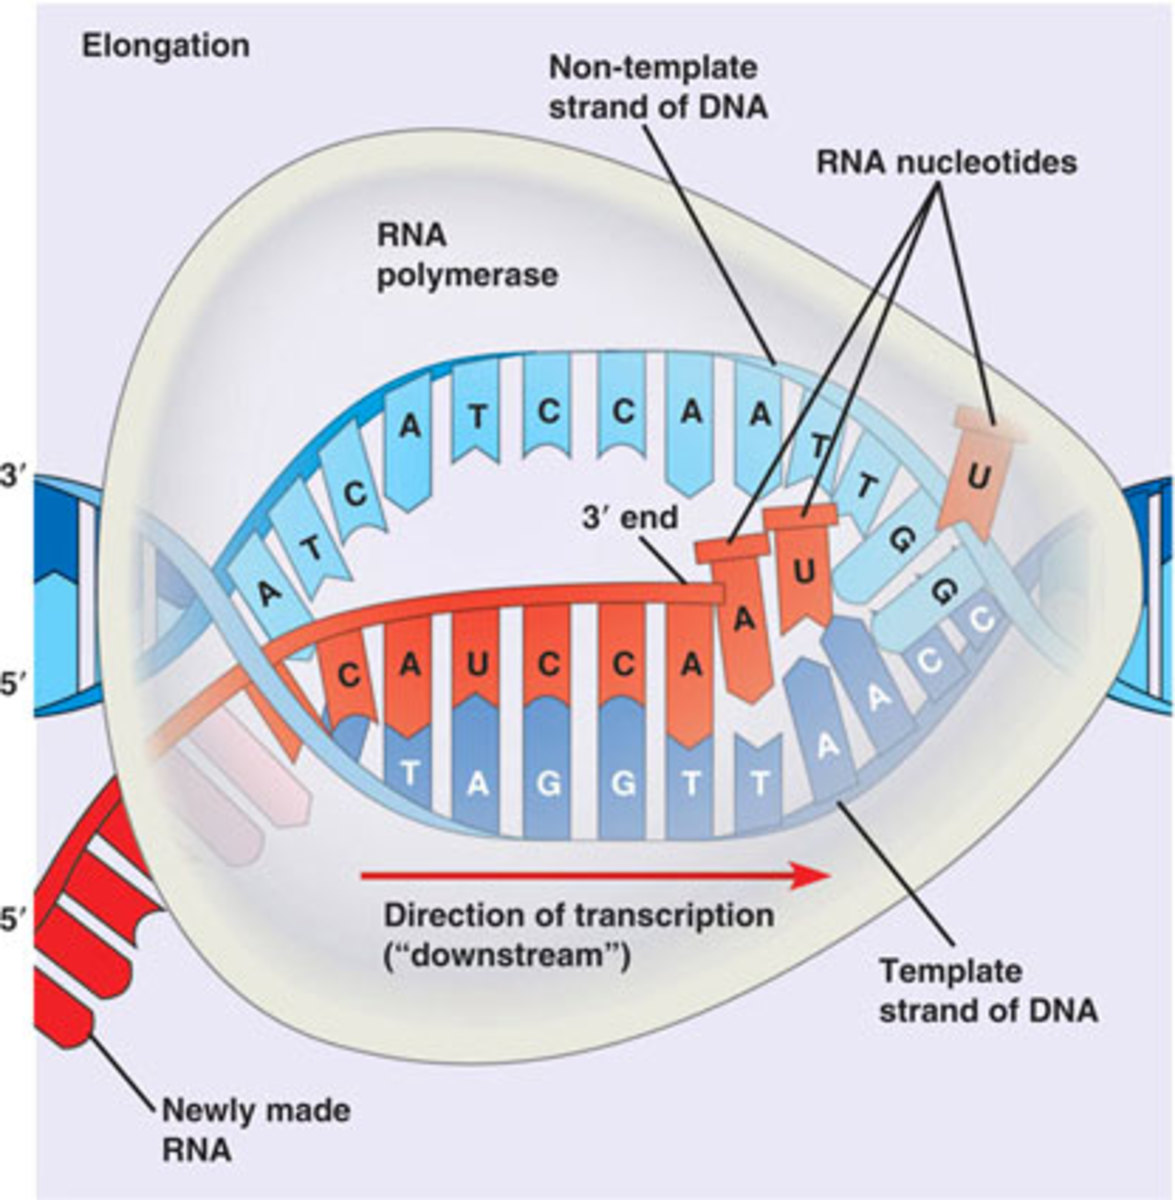 This figure shows the elongation of an RNA strand. At this point, transcription is well underway; you can clearly see how complementary base pairing rules dictate the sequence of bases in the growing RNA strand.